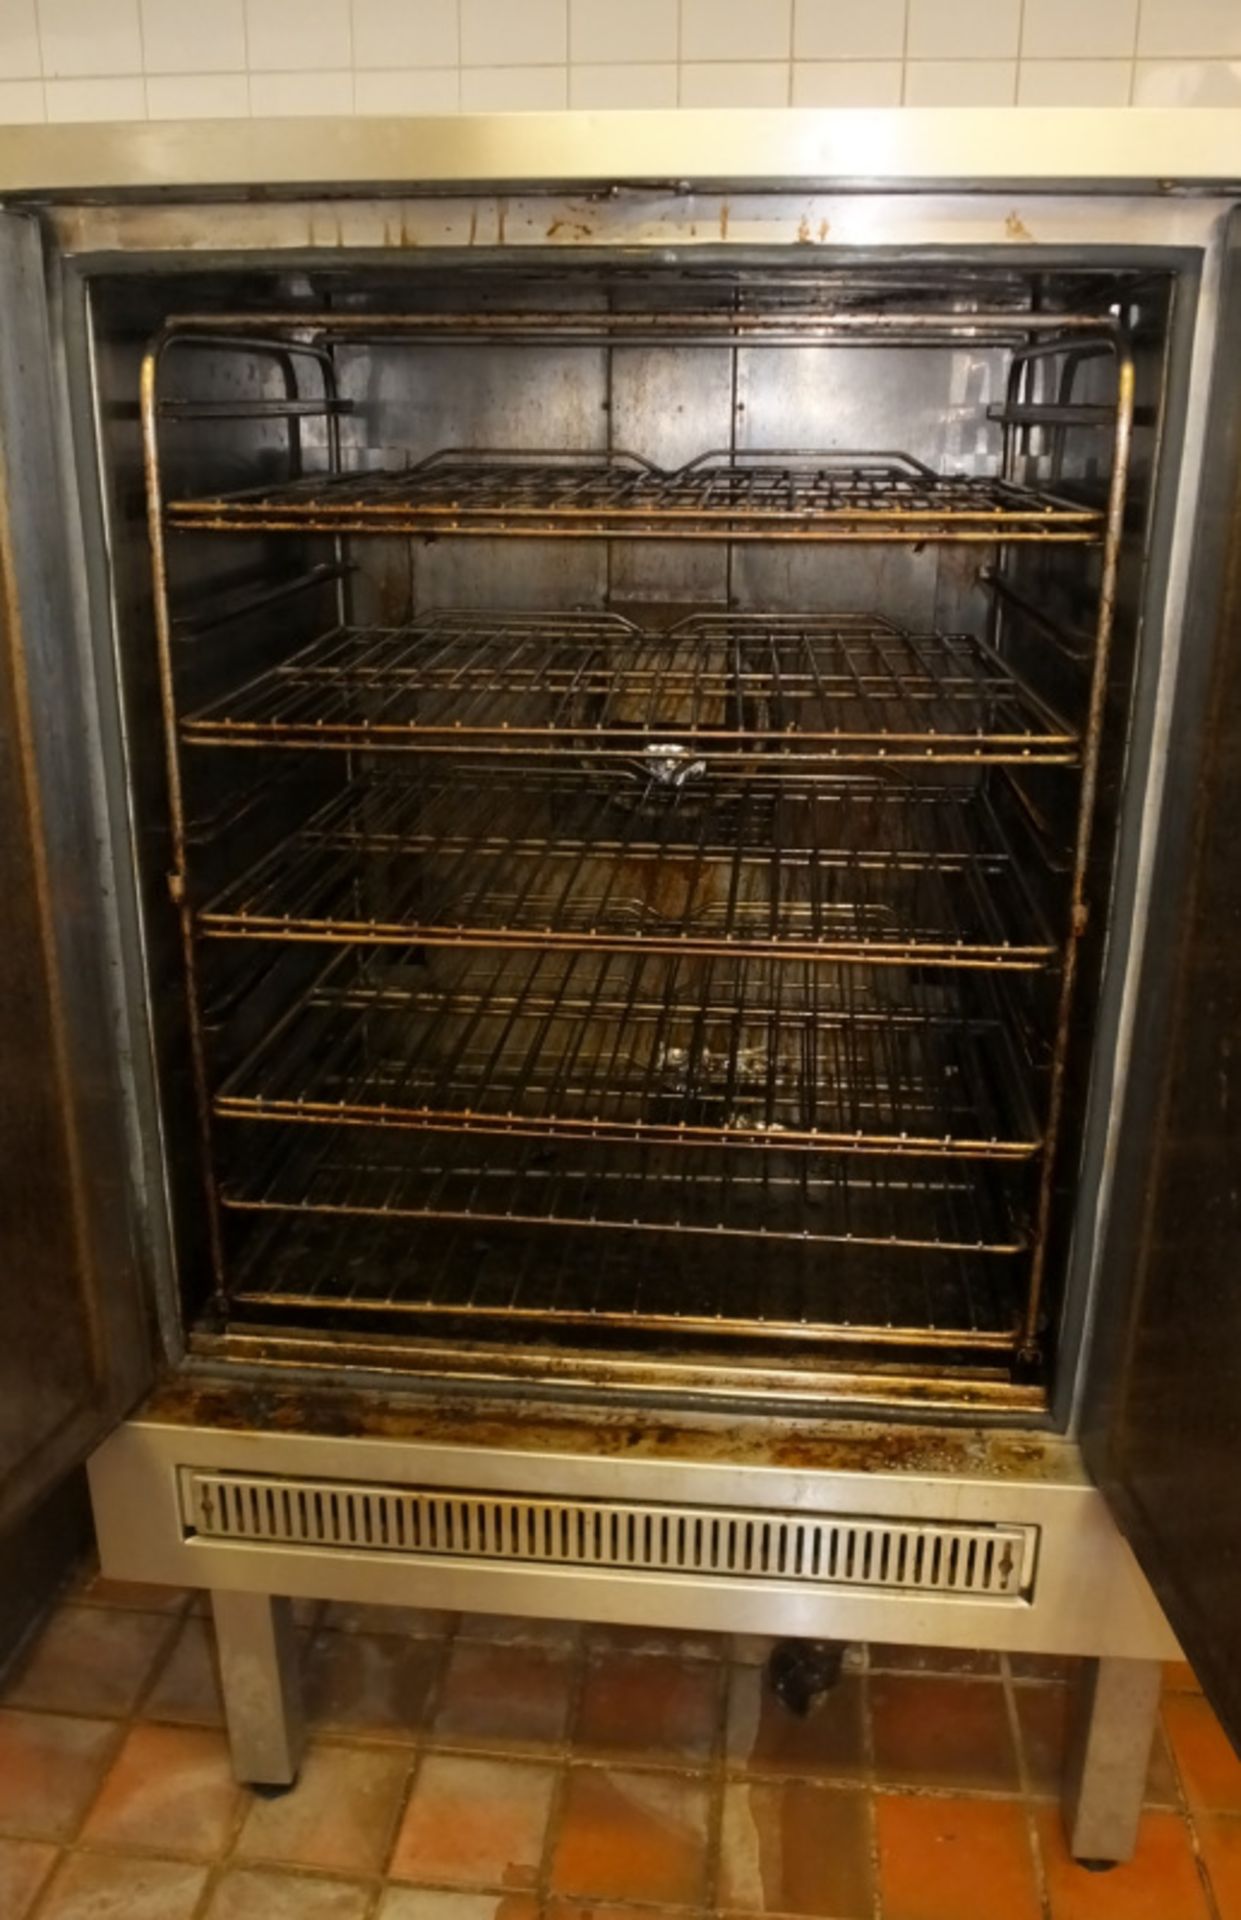 Falcon Convection Oven - Natural Gas - L1000 x D930 x H1525mm - Image 4 of 5